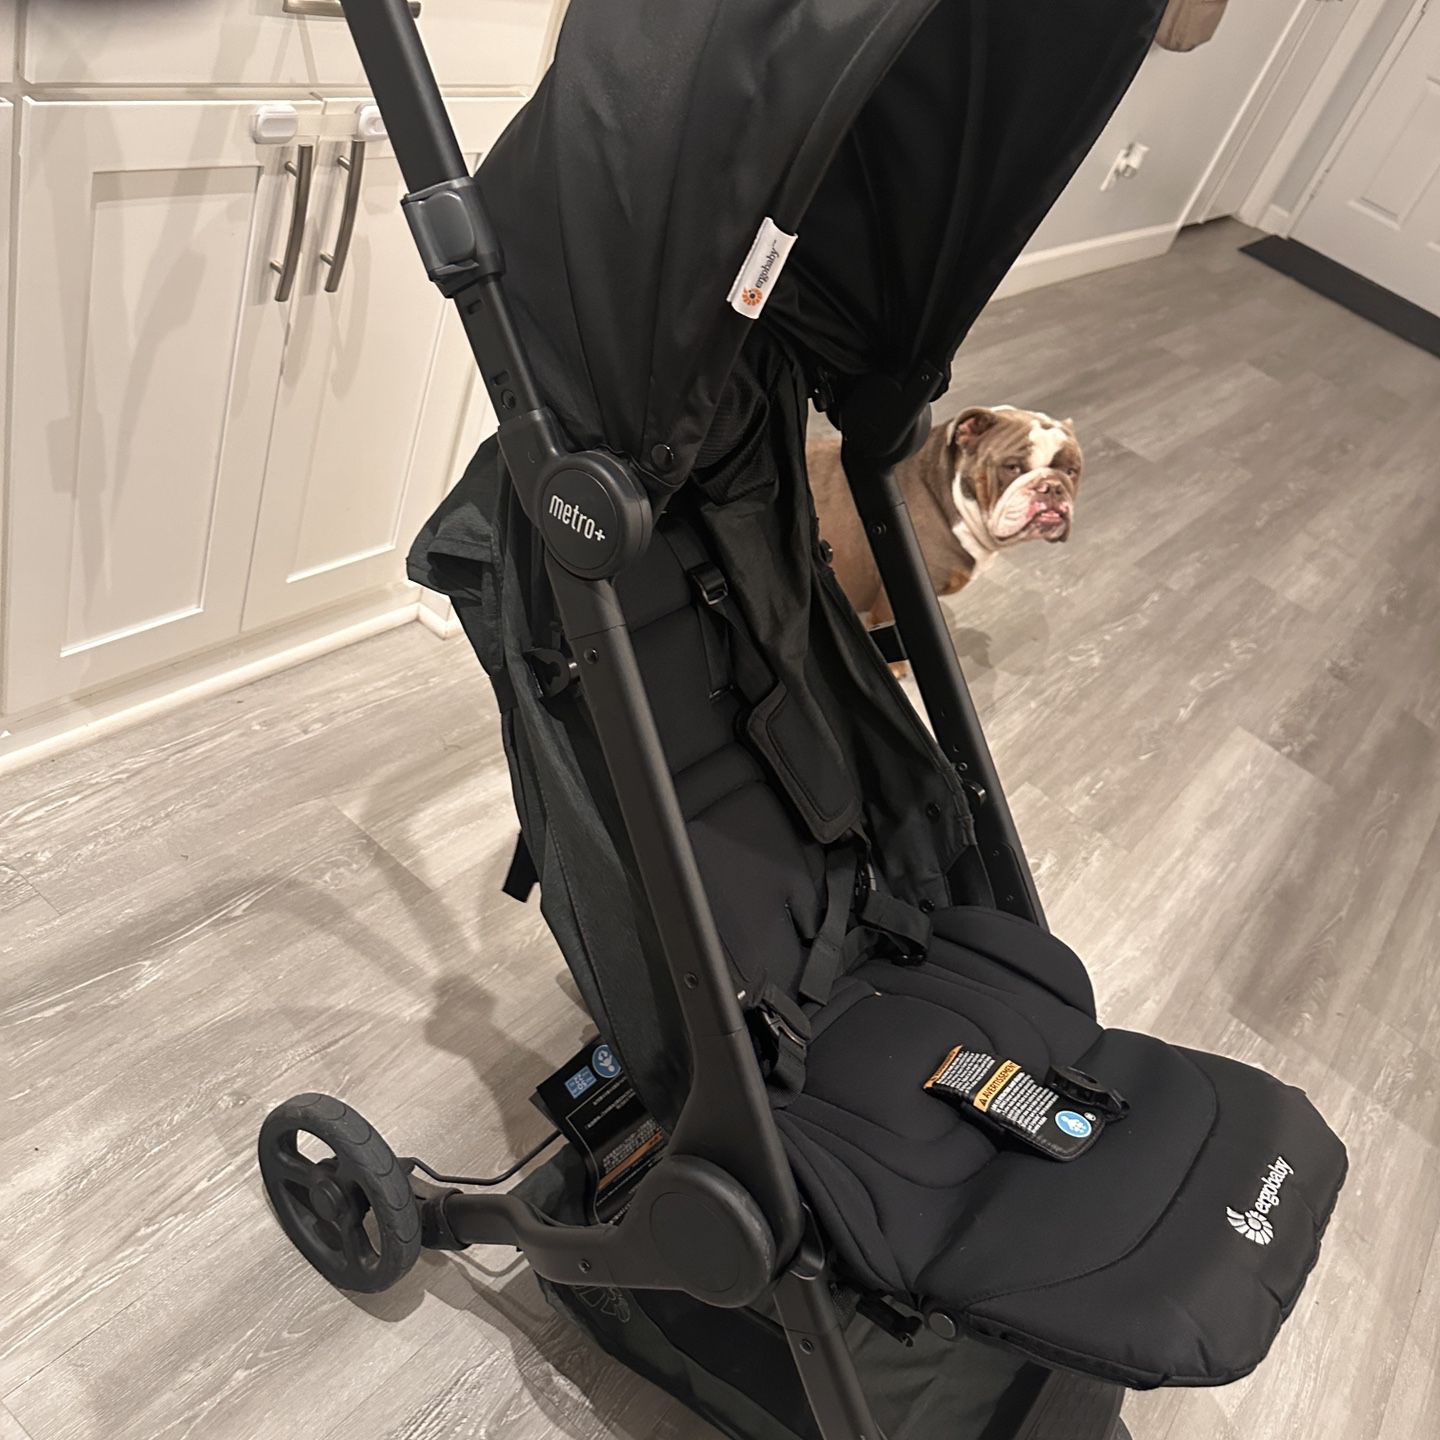 Ergo baby Metro+ Compact Stroller  (serious Inquiry’s Only Please ) OBO